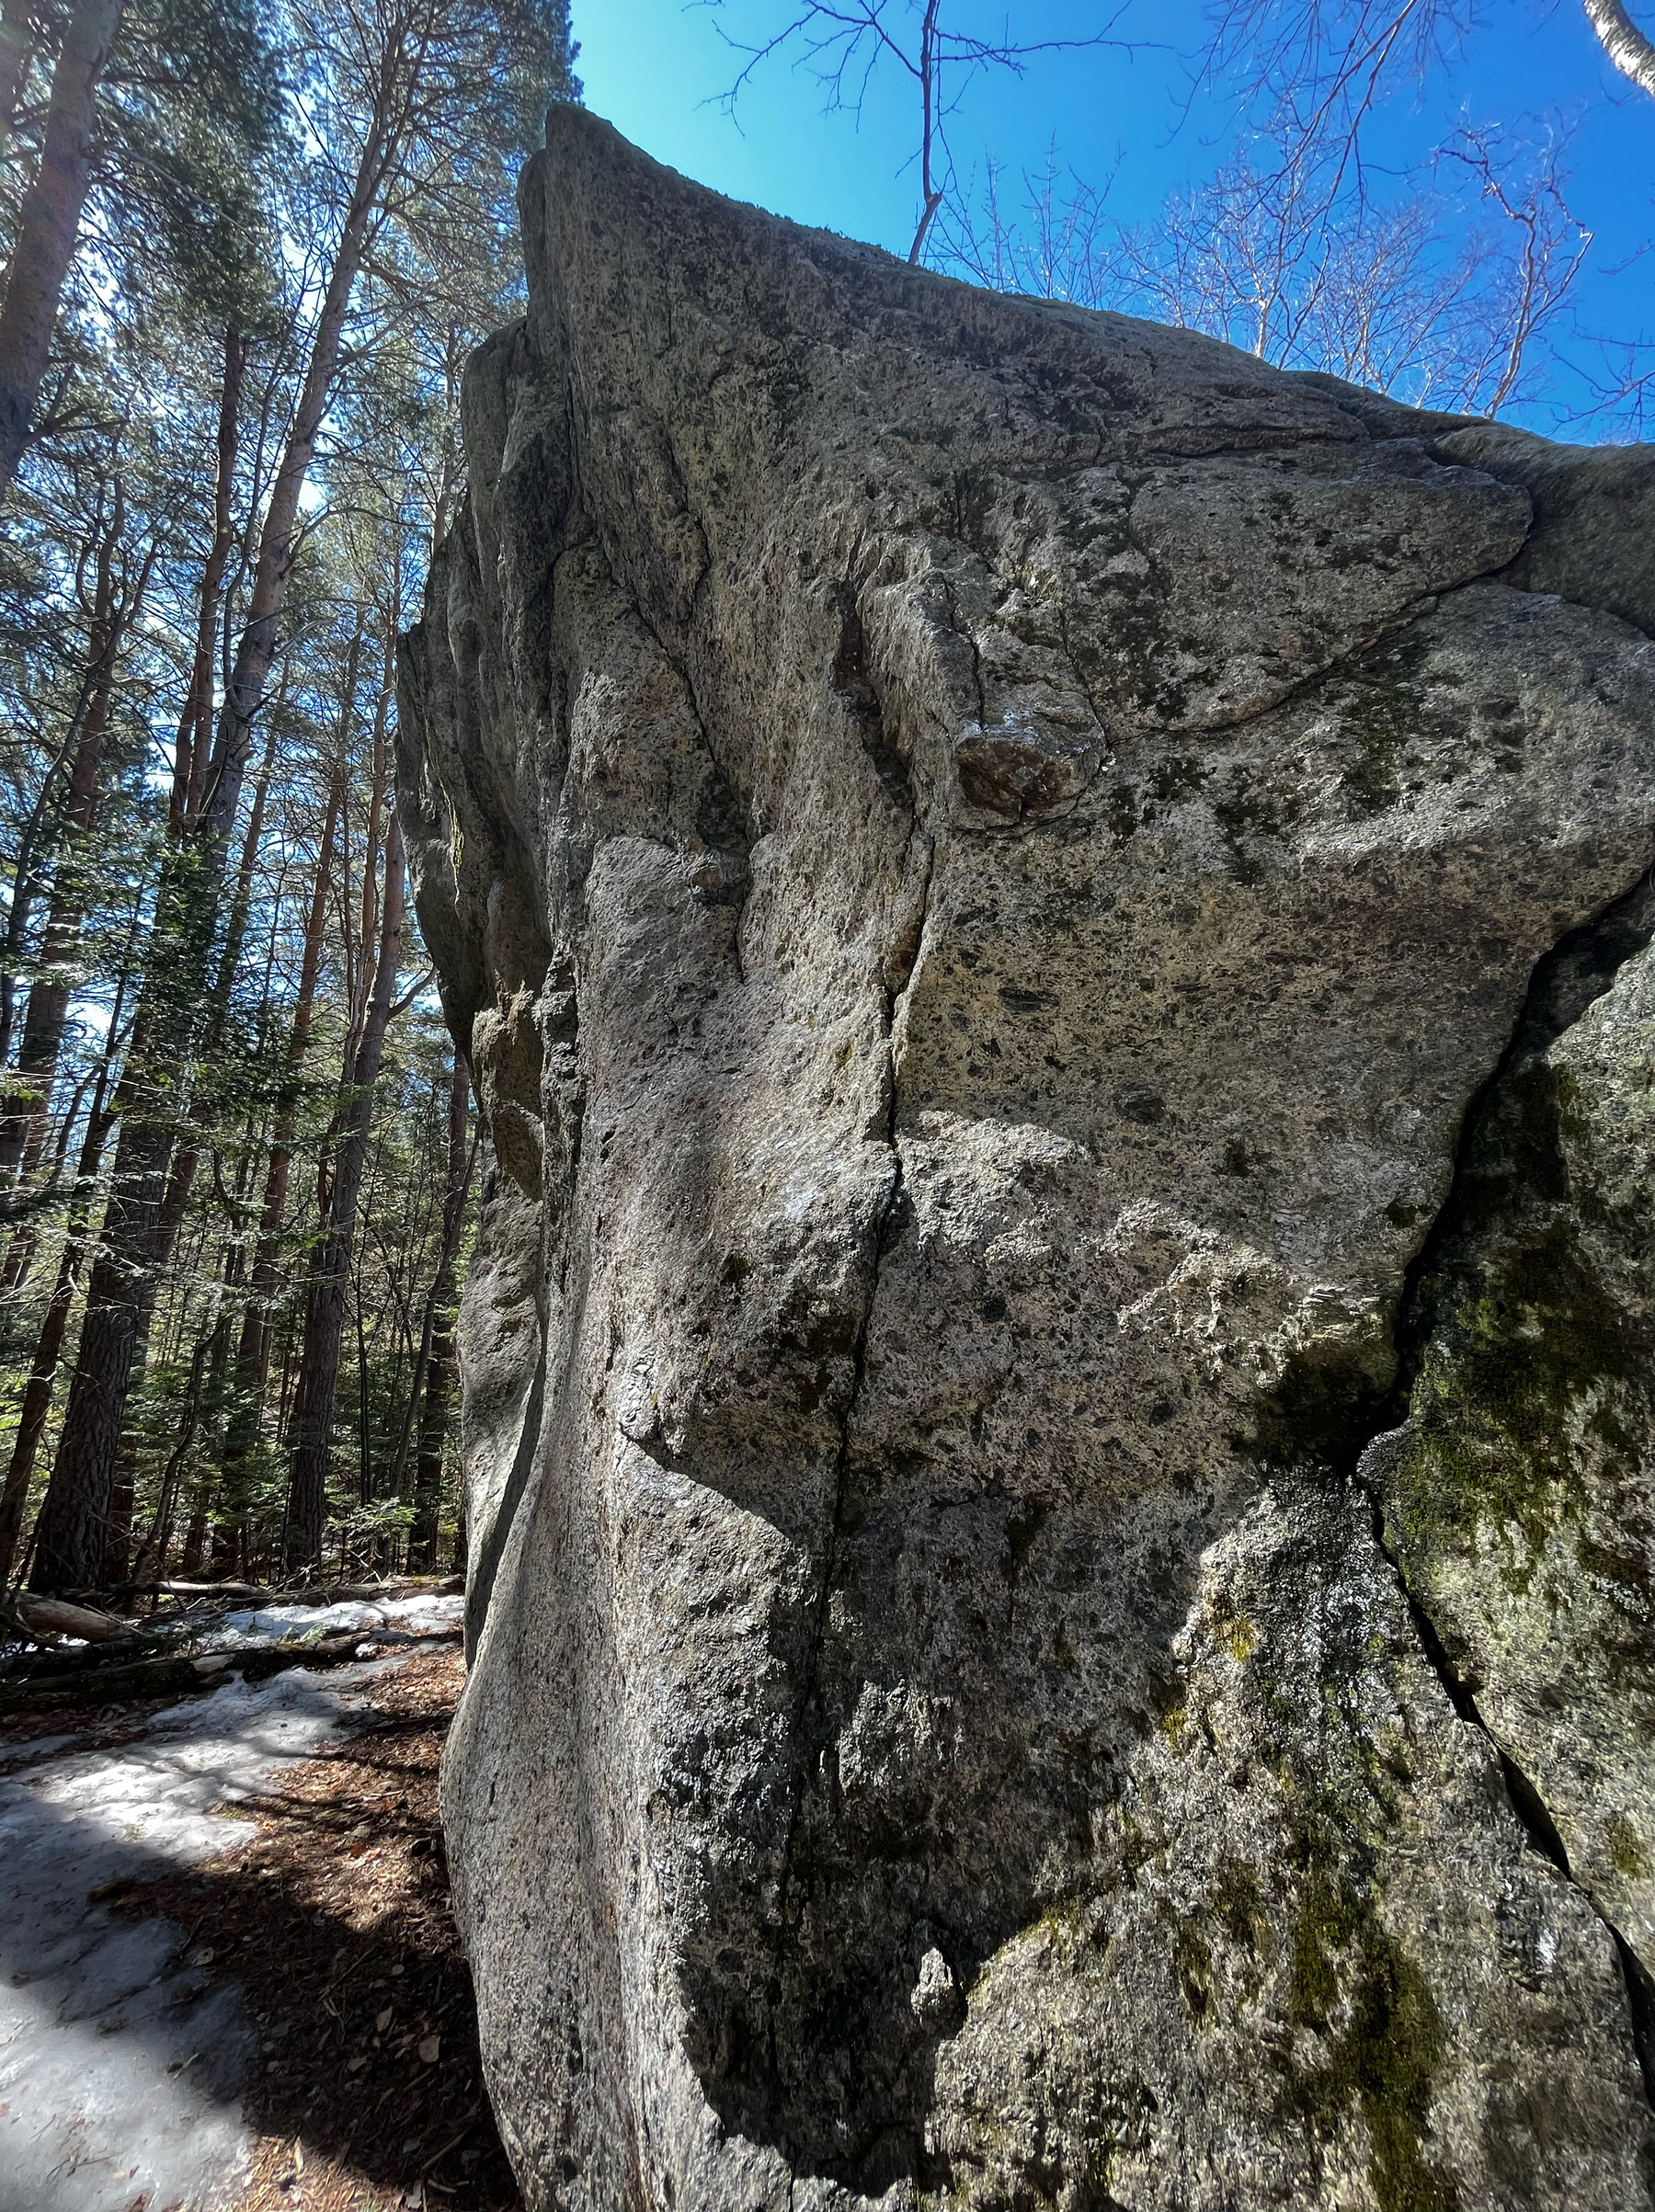 A tall boulder in the spring sunshine.